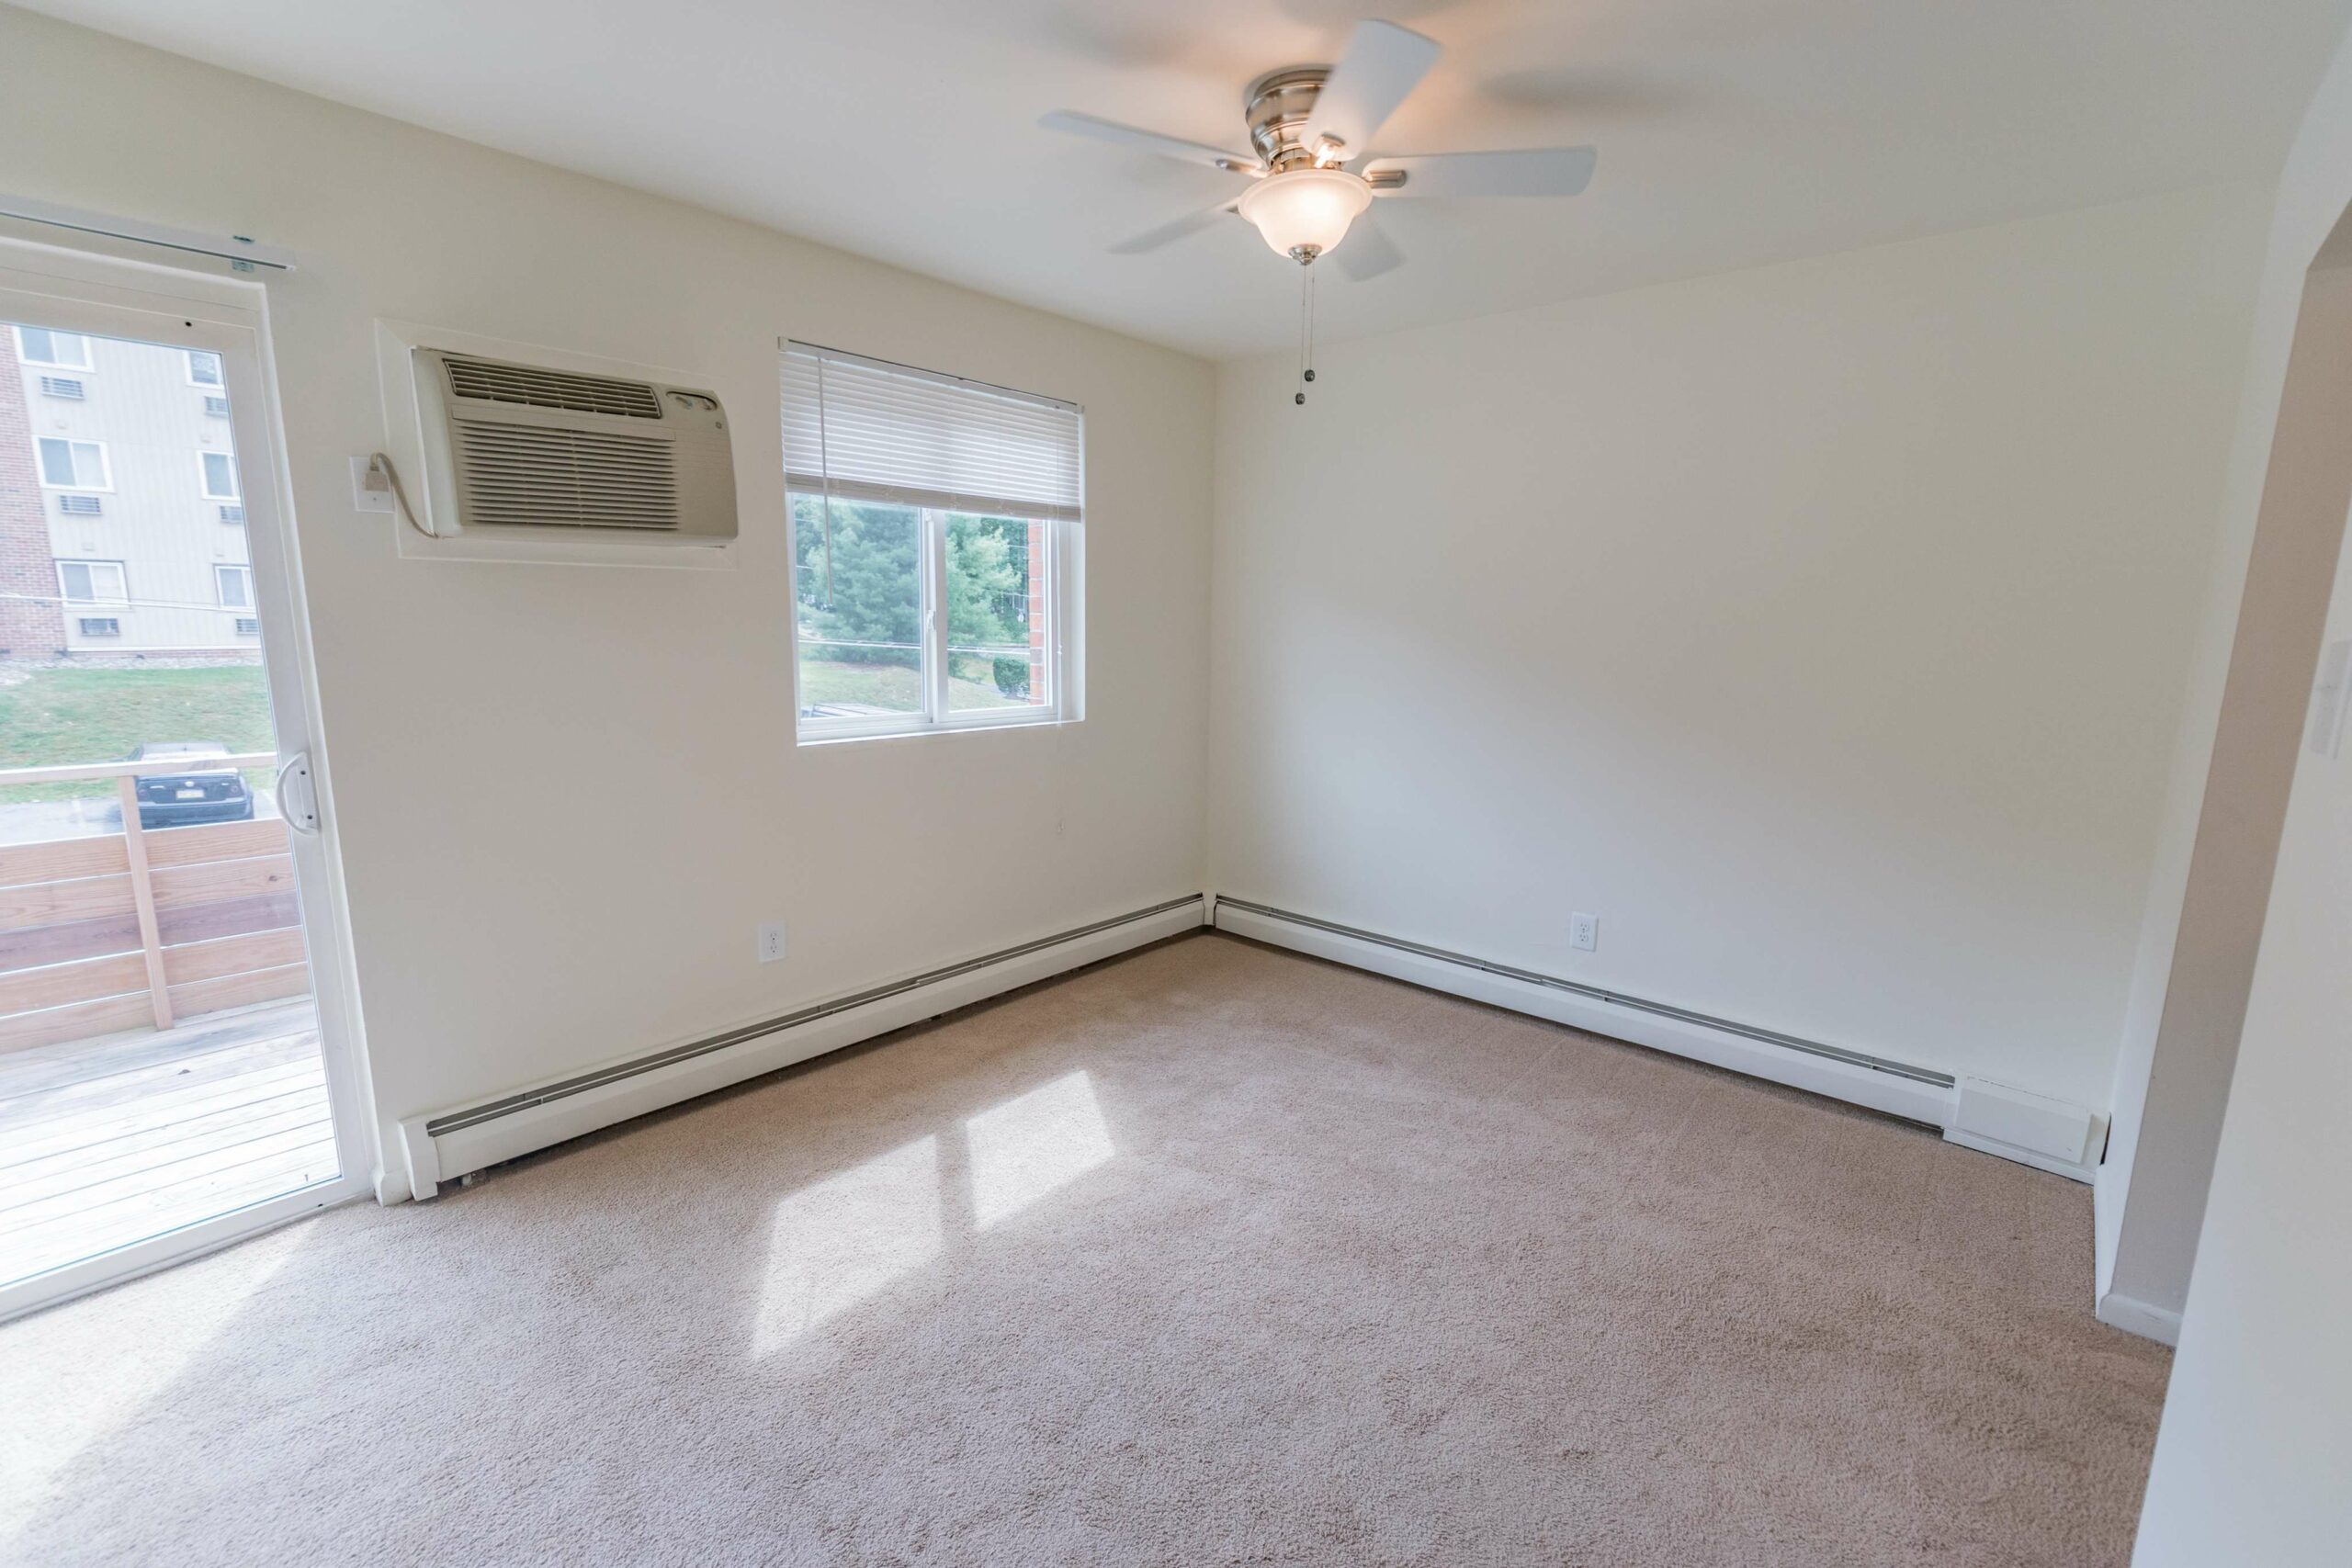 Bedroom area of an apartment unfurnished, fitted with carpet flooring, spacious closet, and a patio access